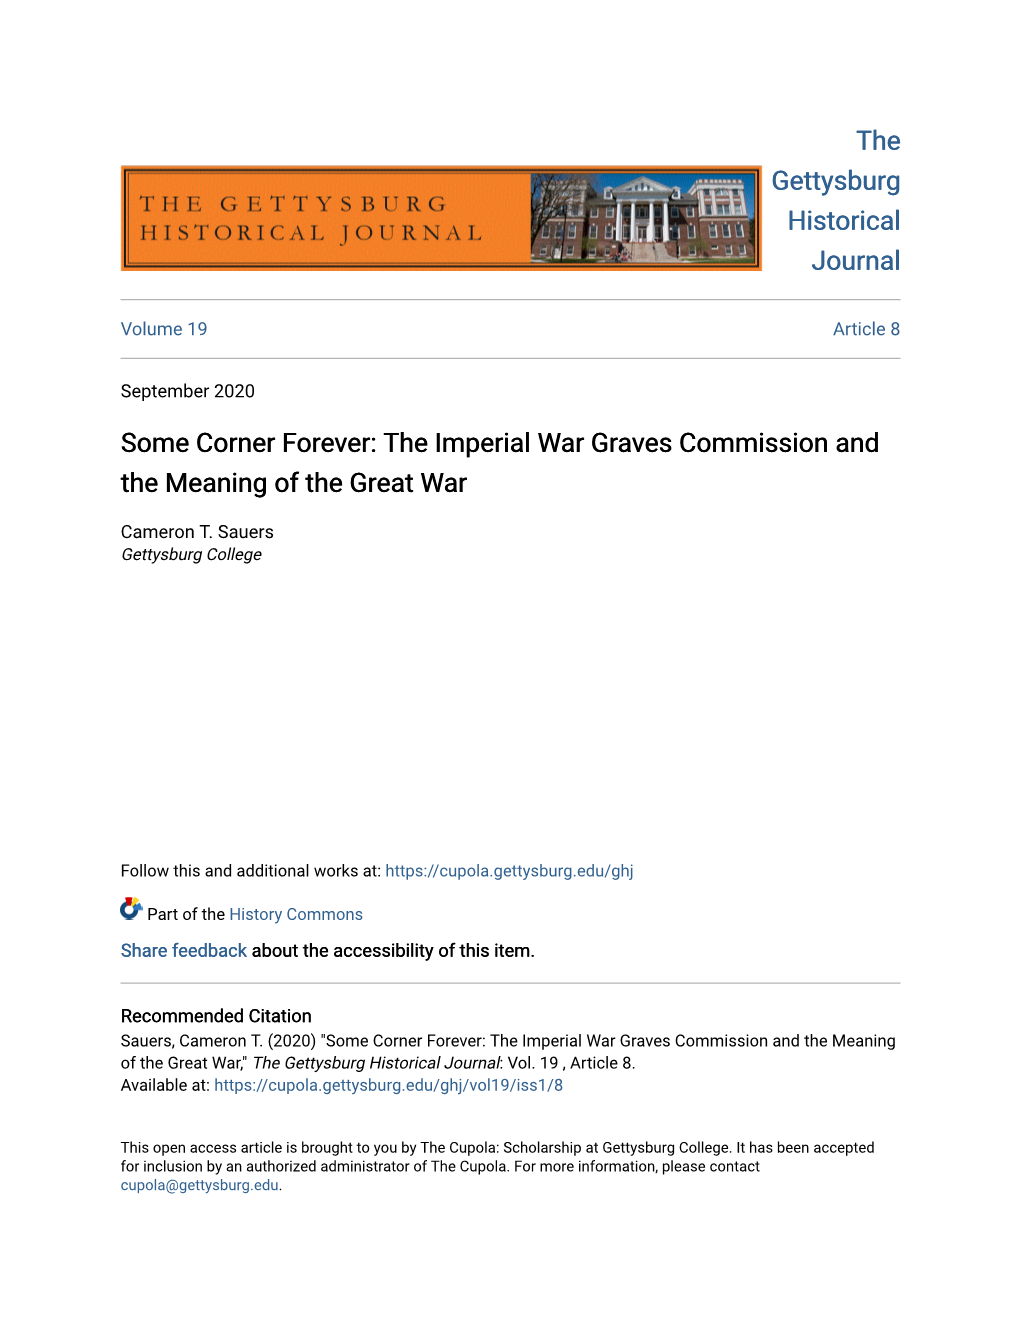 The Imperial War Graves Commission and the Meaning of the Great War